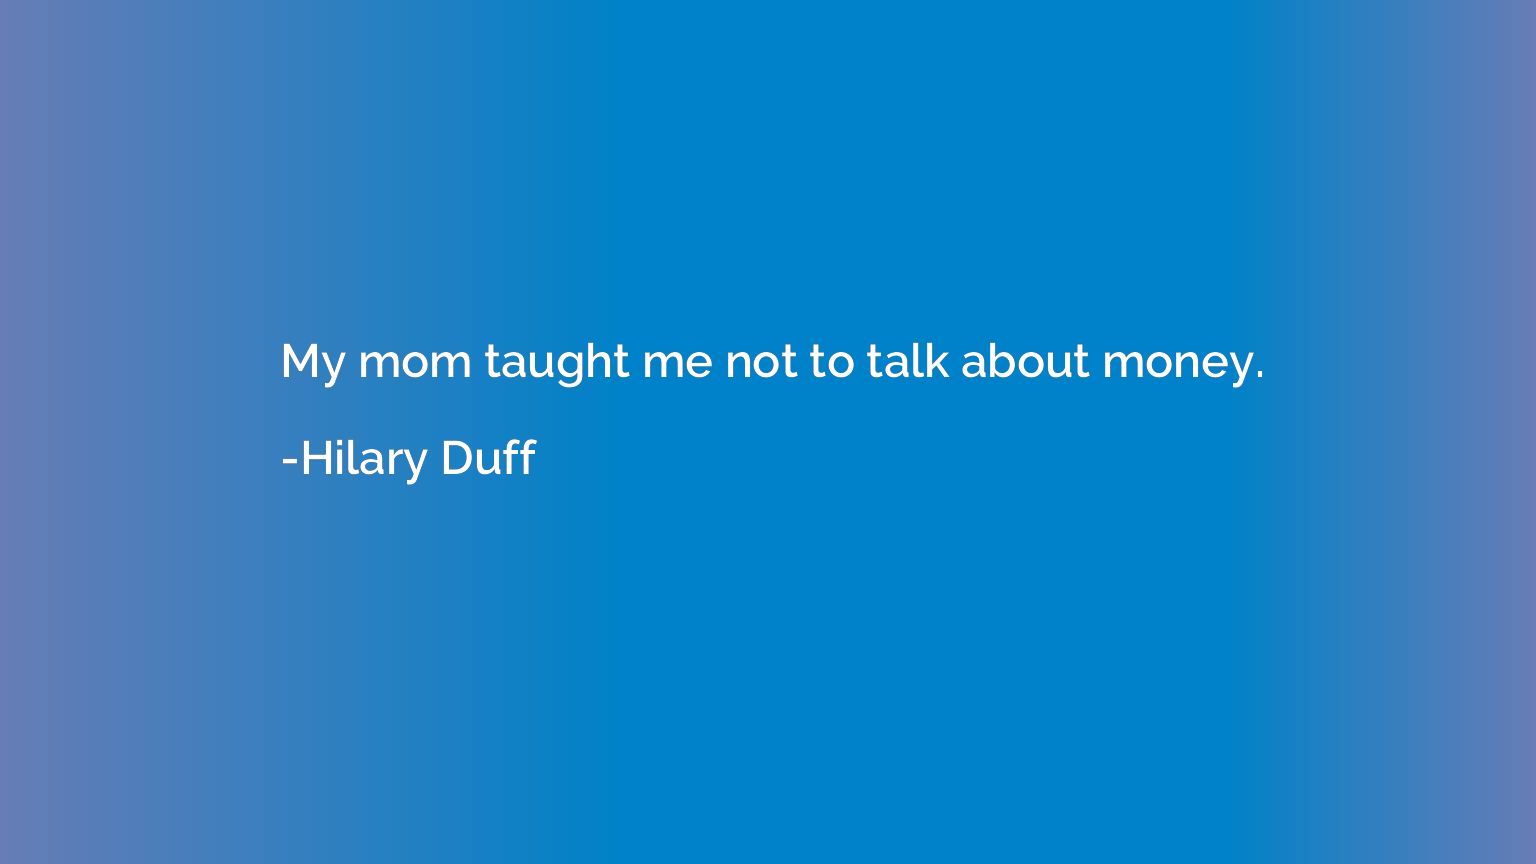 My mom taught me not to talk about money.